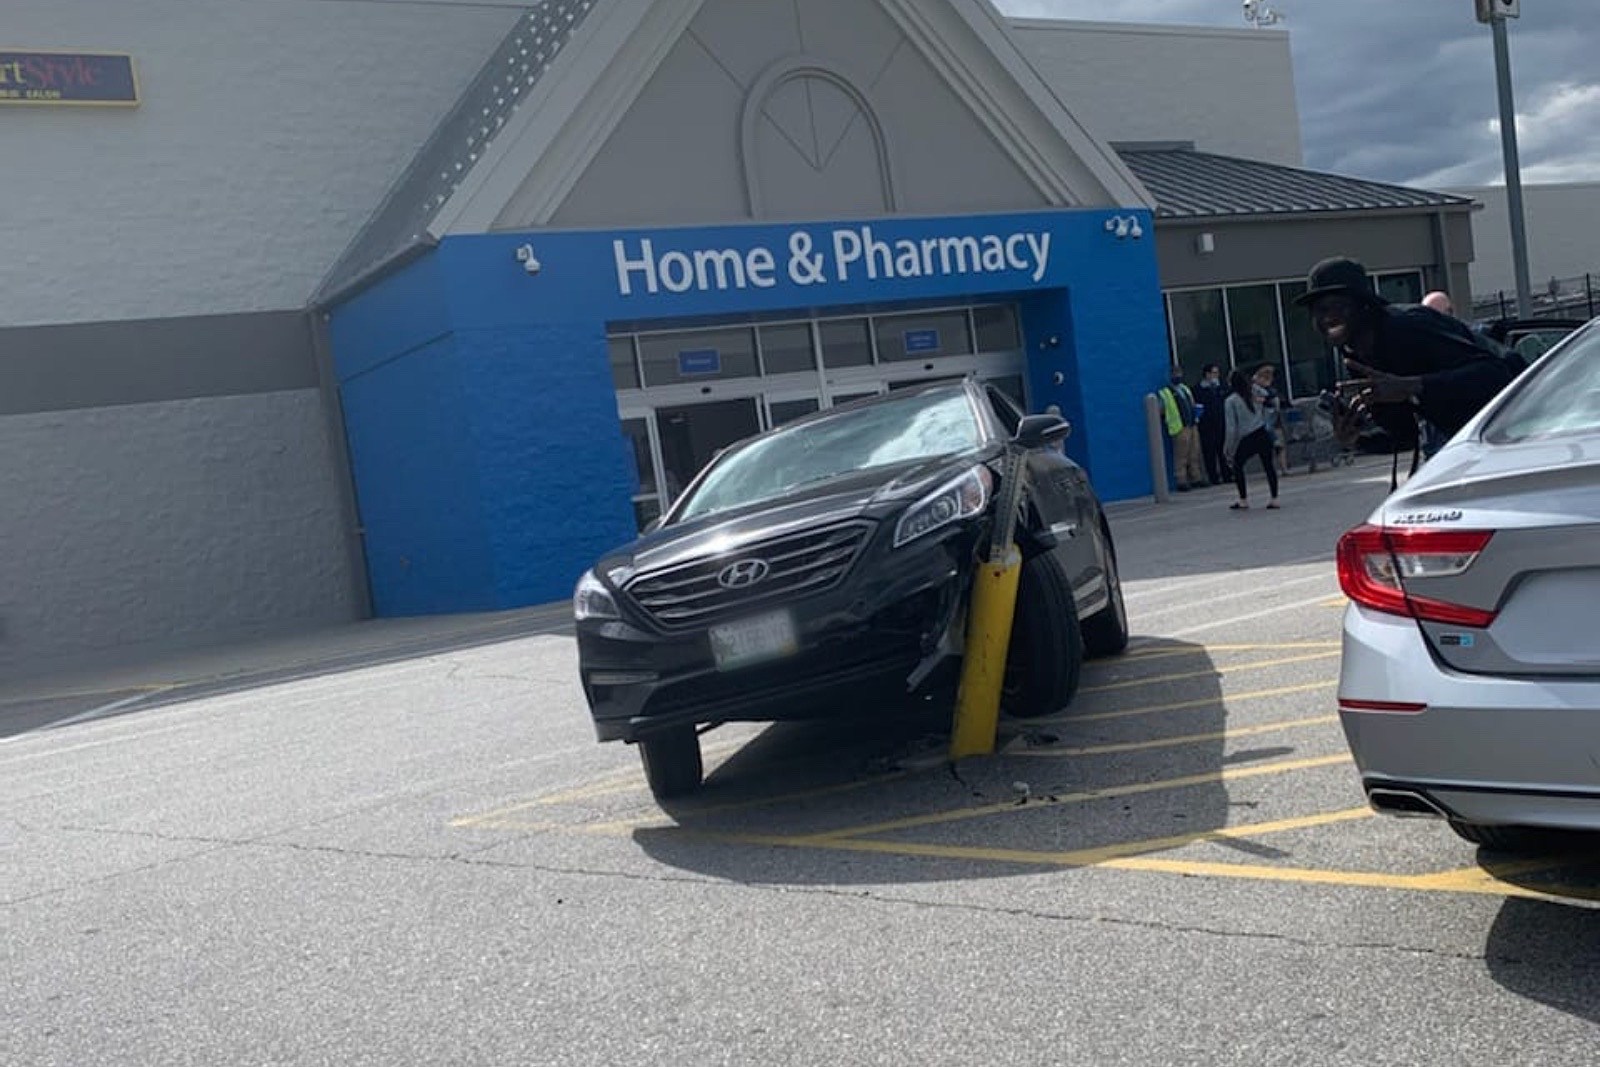 Will This Stop the Auburn, Maine, Walmart Pole From Being Hit?